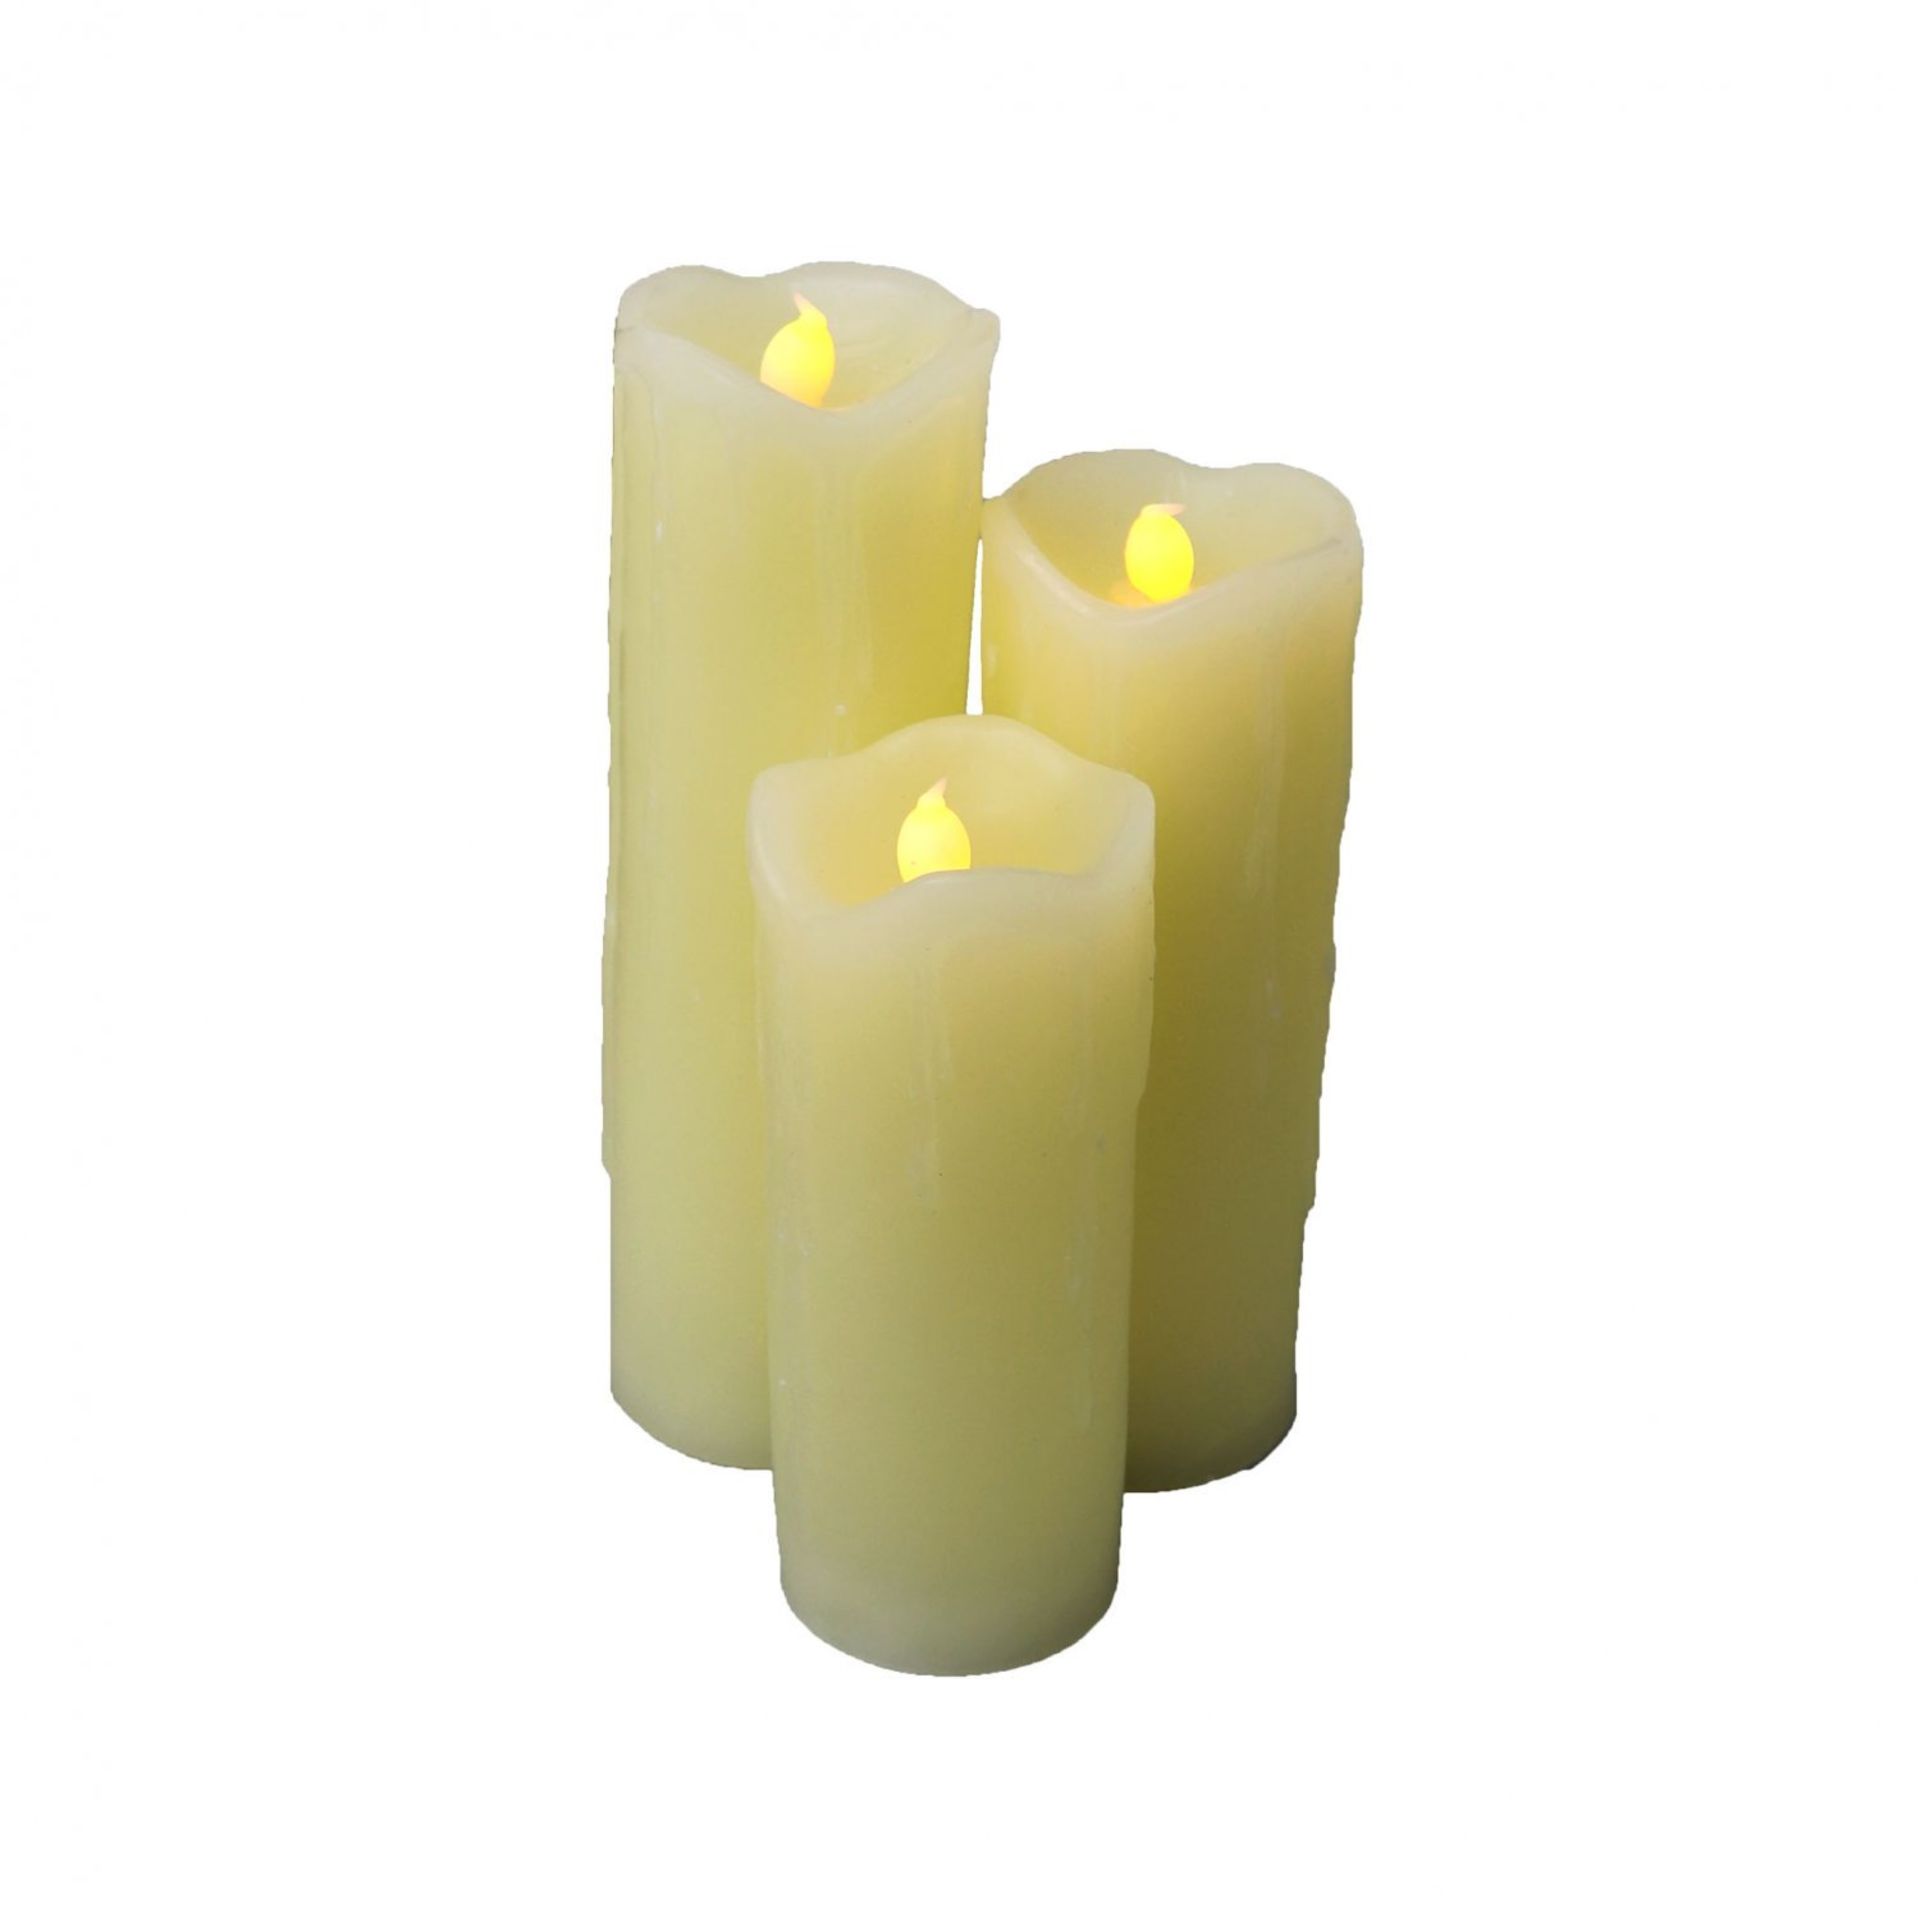 (LF31) 6 Real Wax Flameless Battery Operated LED Candles The LED candles are a safe and styl... - Image 2 of 2